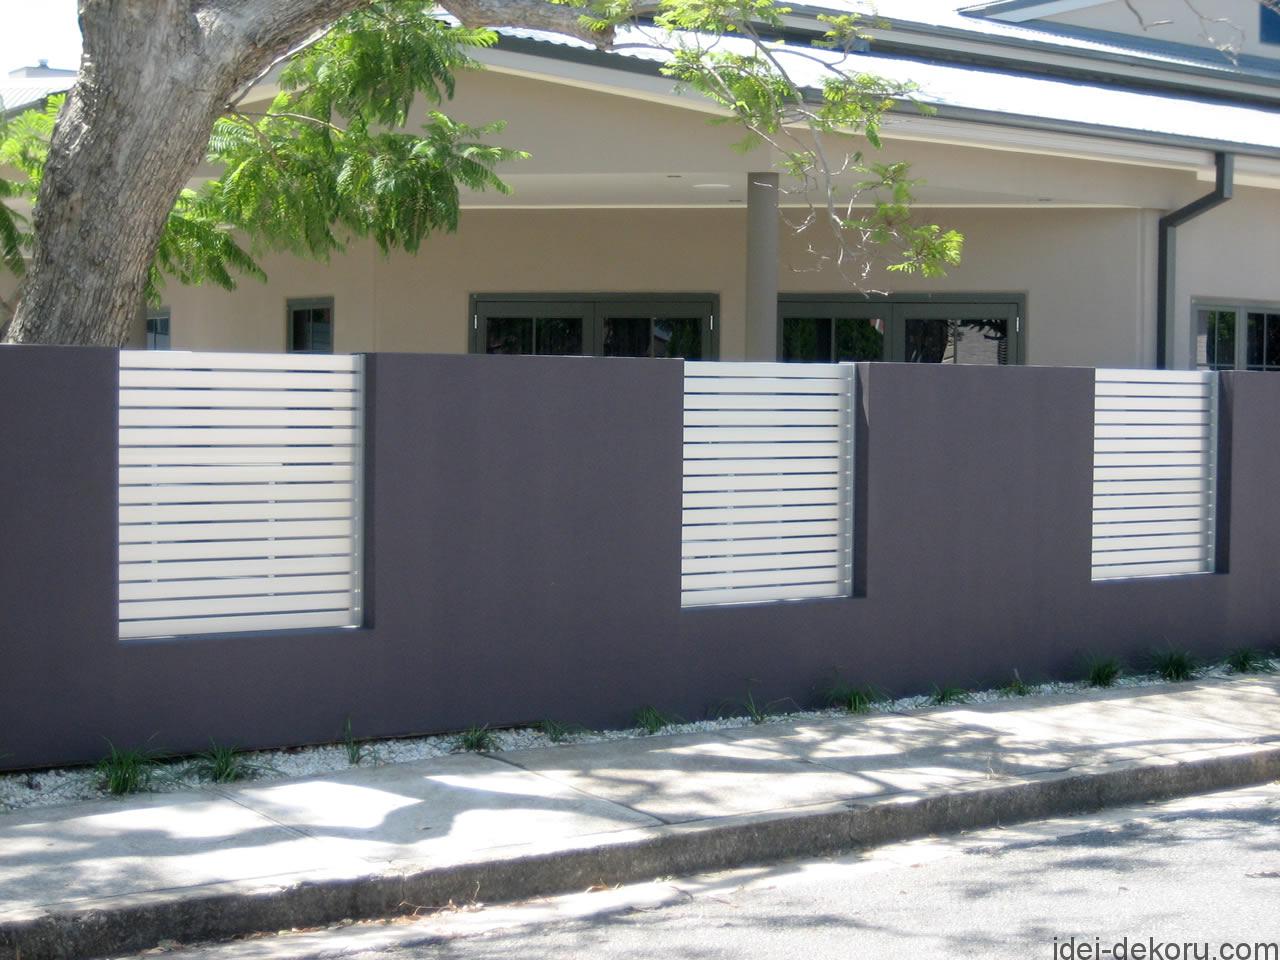 Building-contractor-fence-design-picture-gallery